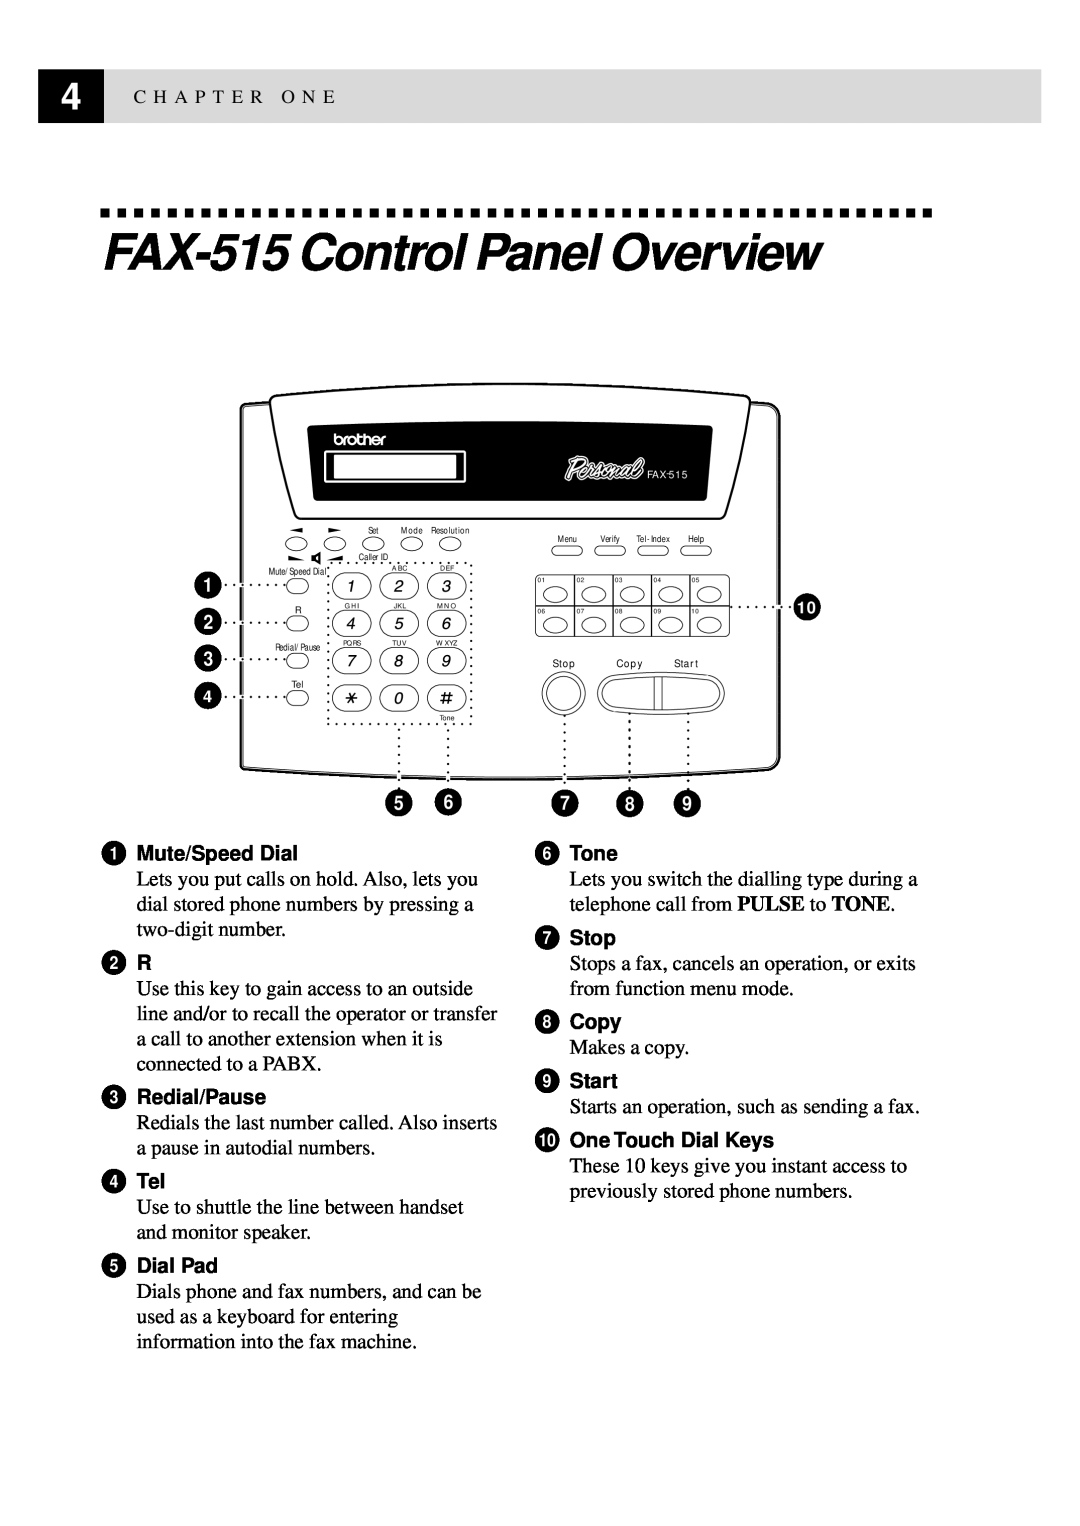 Brother manual FAX-515 Control Panel Overview 